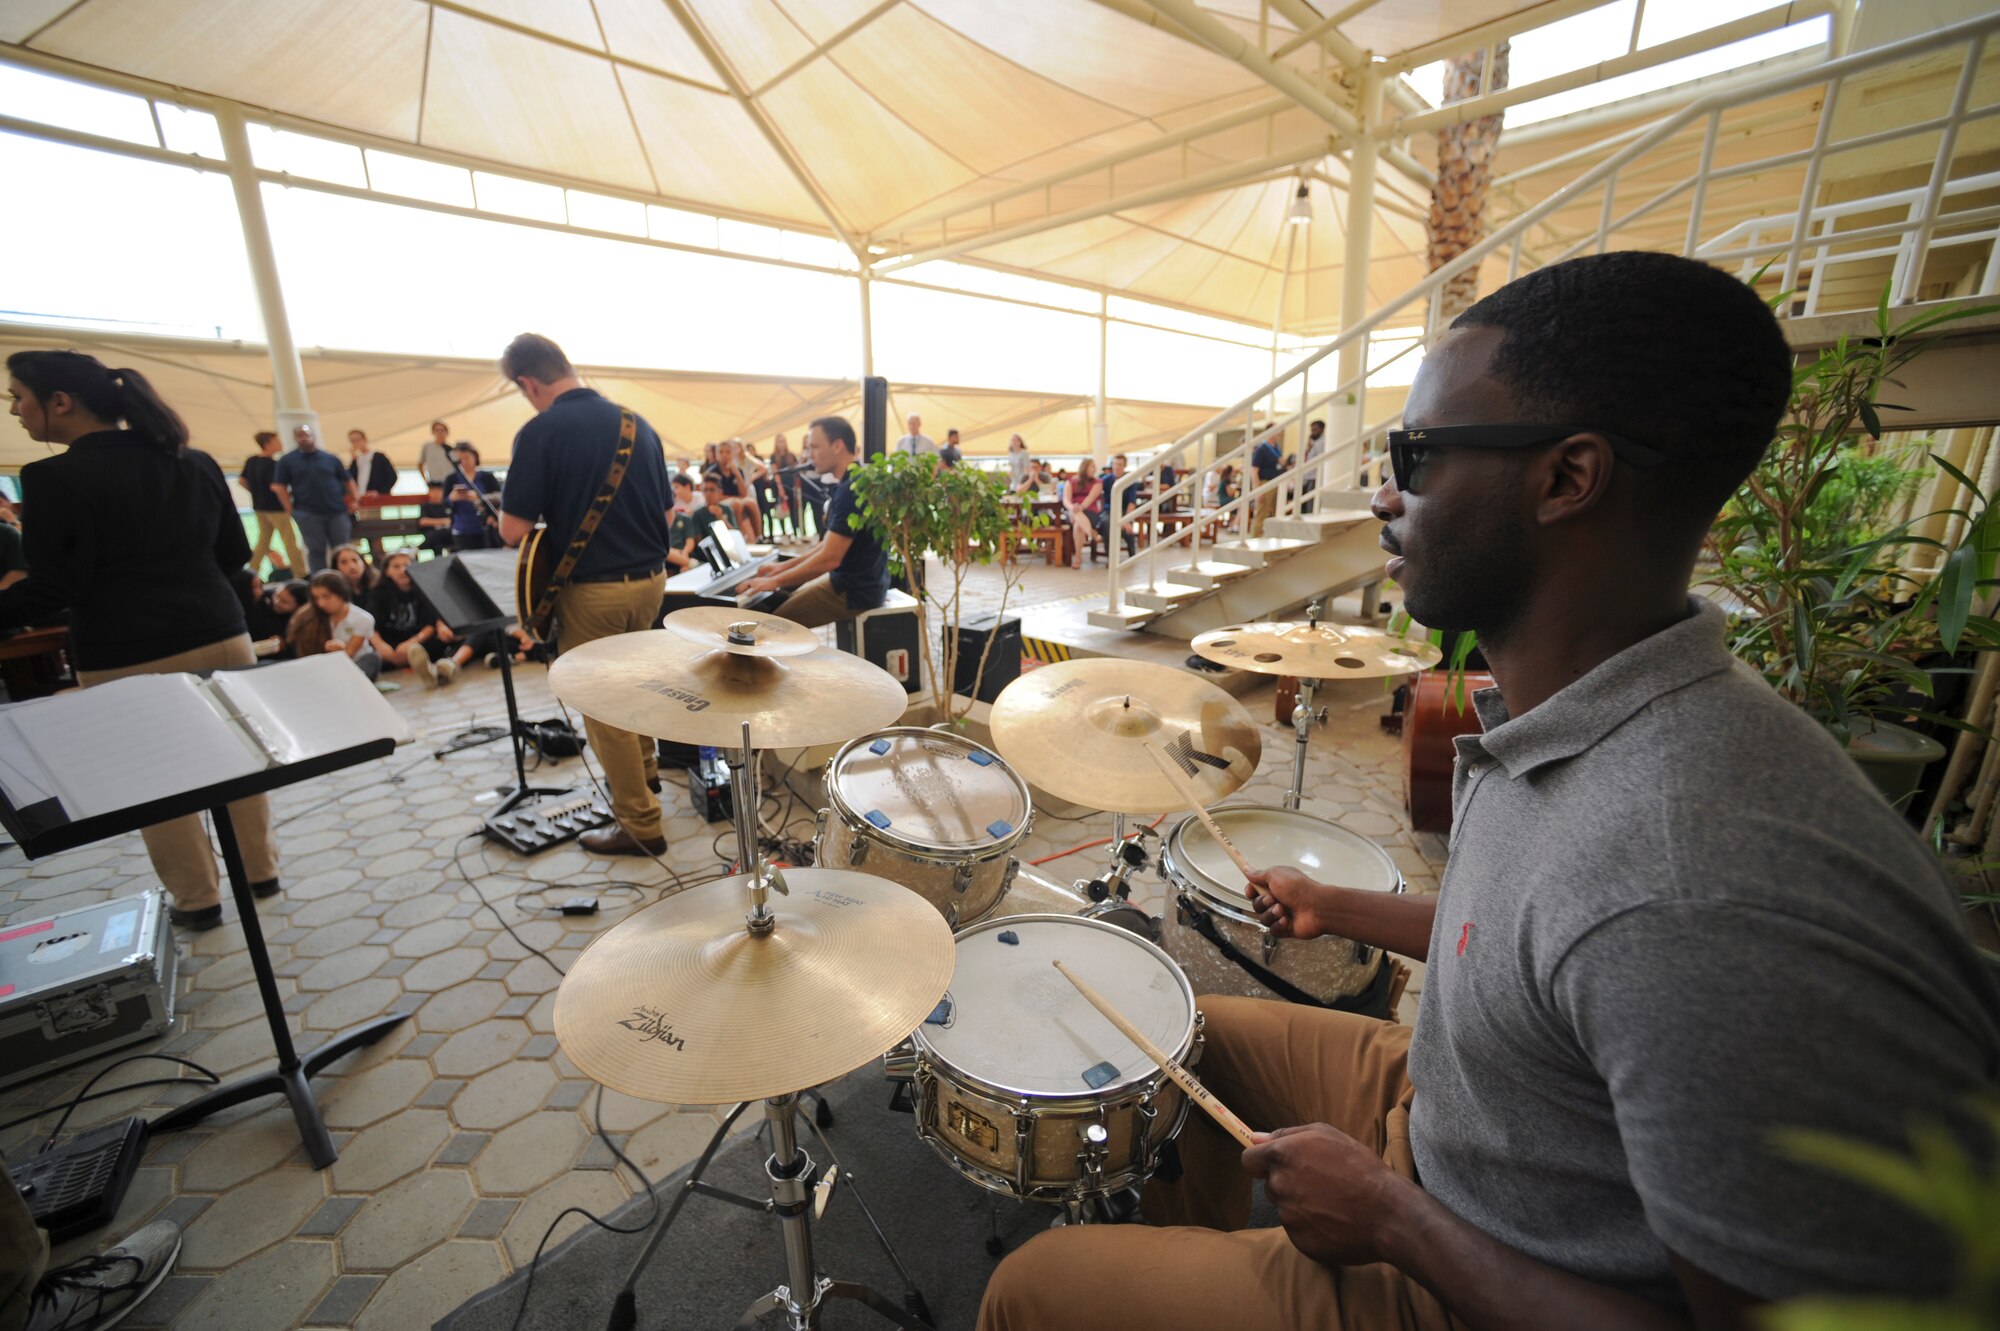 U.S. Air Force Staff Sgt. Quincy Brown, a drummer with the AFCENT band, performs at a school within the United Arab Emirates, Jan. 28, 2018. Using music to bridge language, cultural, societal and socio-economic differences, the bands play a key role in increasing public understanding of the importance of airpower, the mission, policies, and programs of the Air Force and the bravery, sacrifice and dedication of Airmen. (U.S. Air Force photo by Airman 1st Class D. Blake Browning)